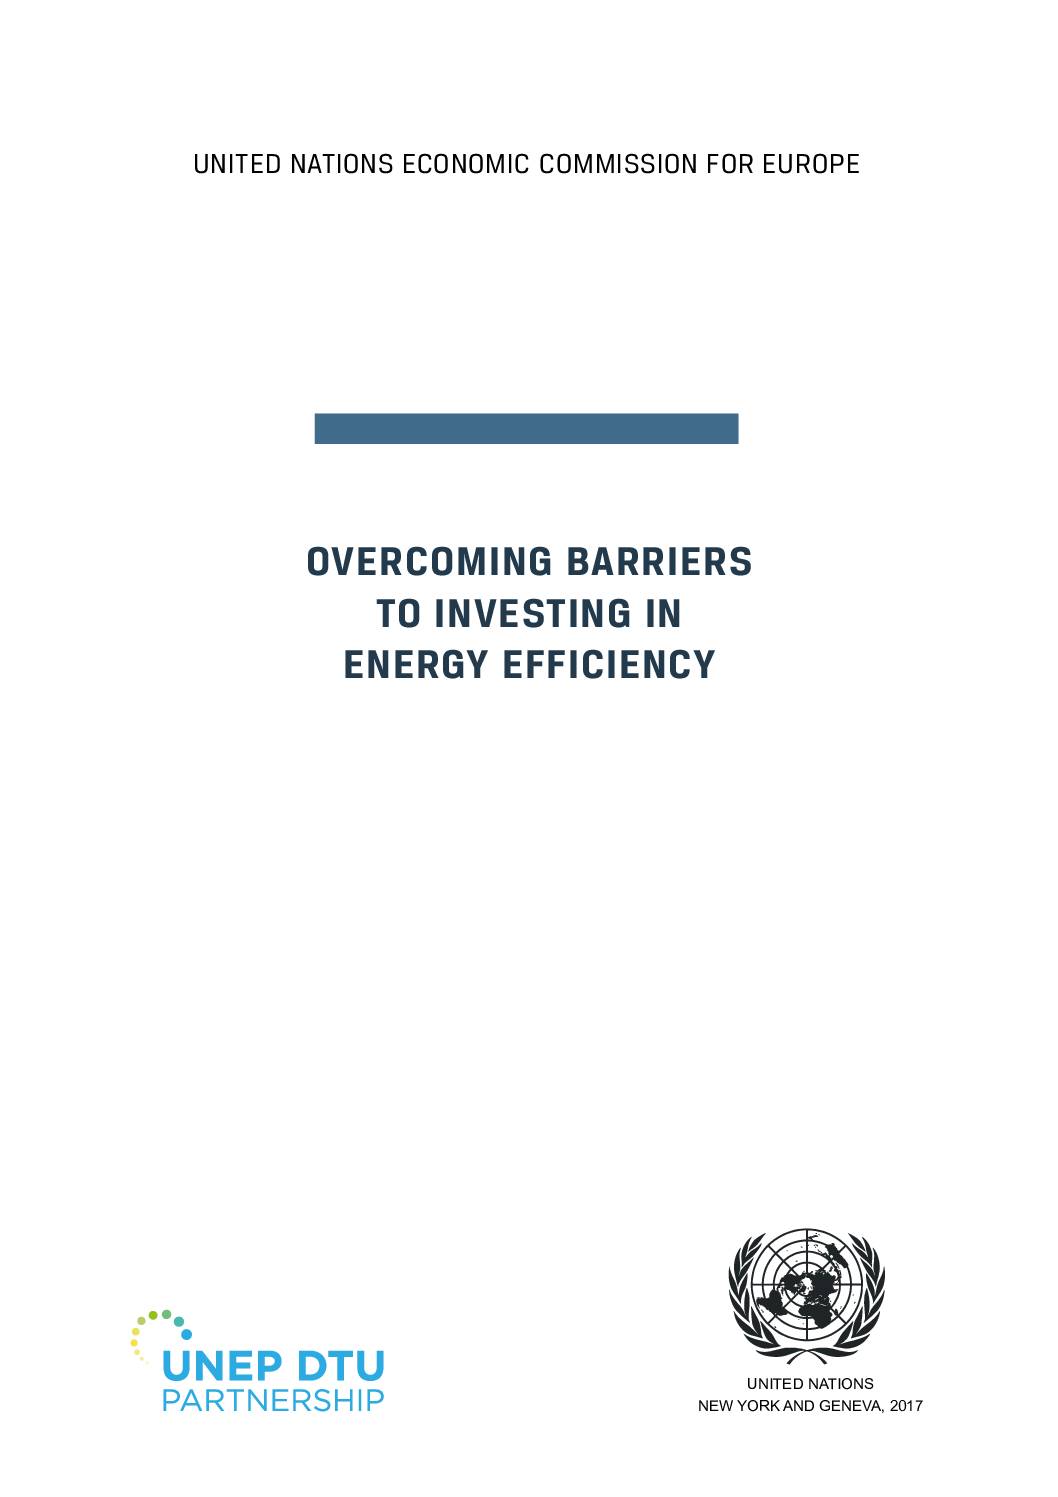 Overcoming barriers to investing in energy efficiency